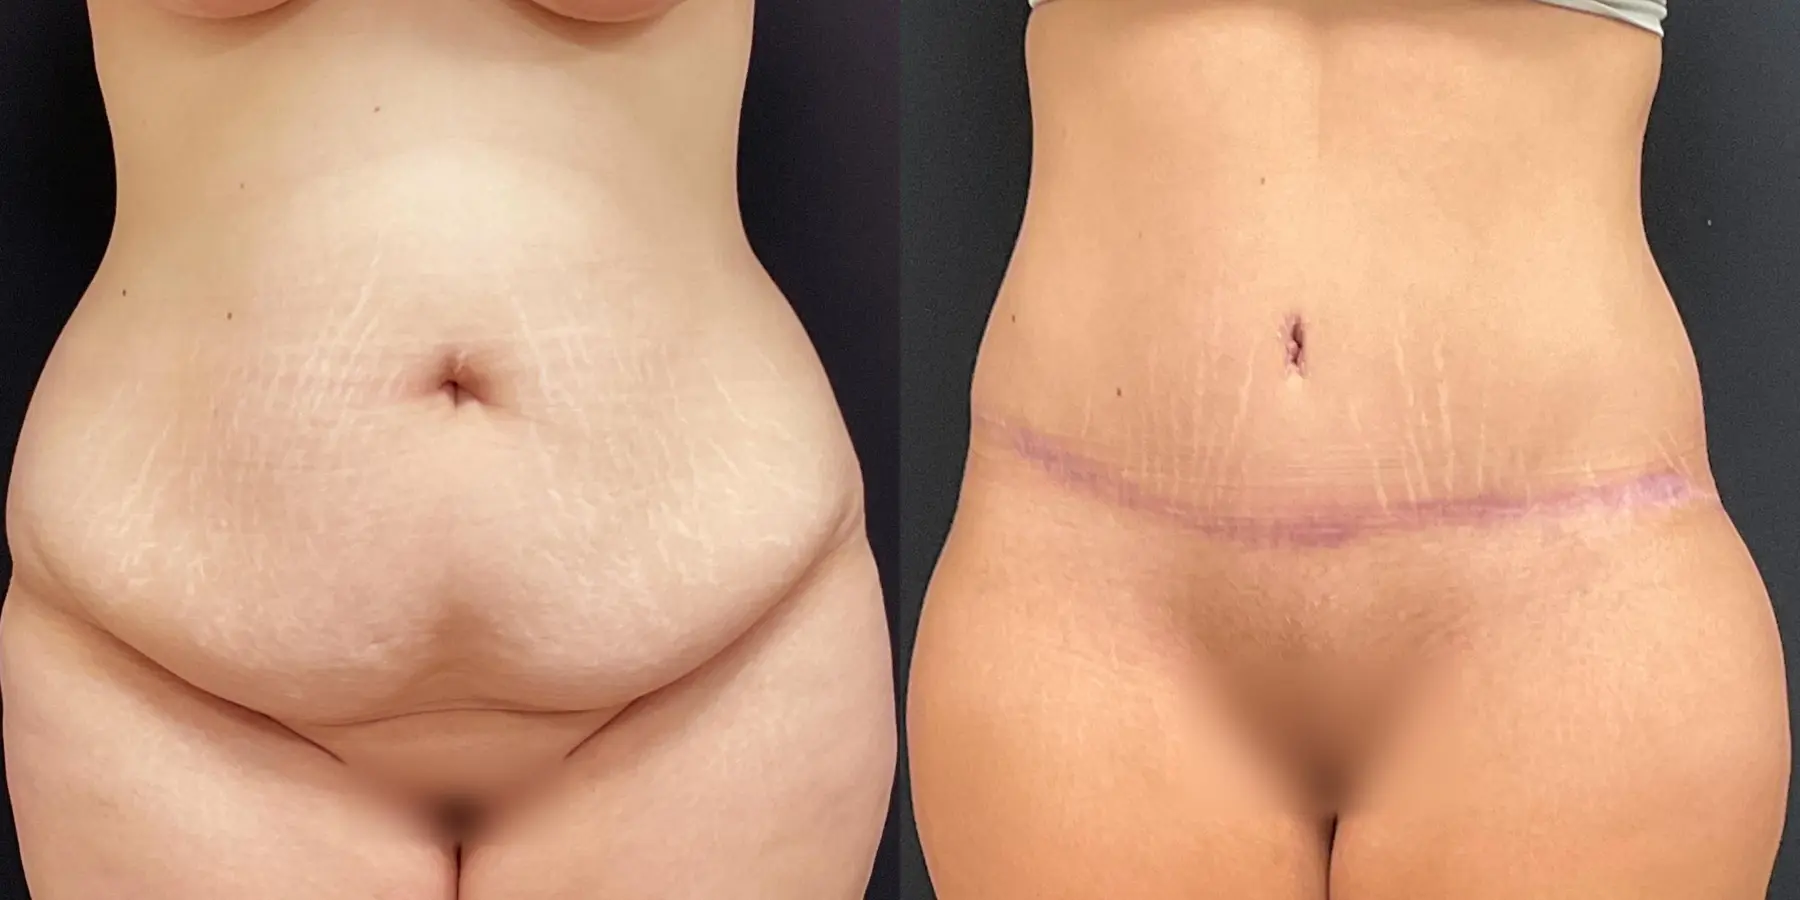 Tummy Tuck: Patient 11 - Before and After  